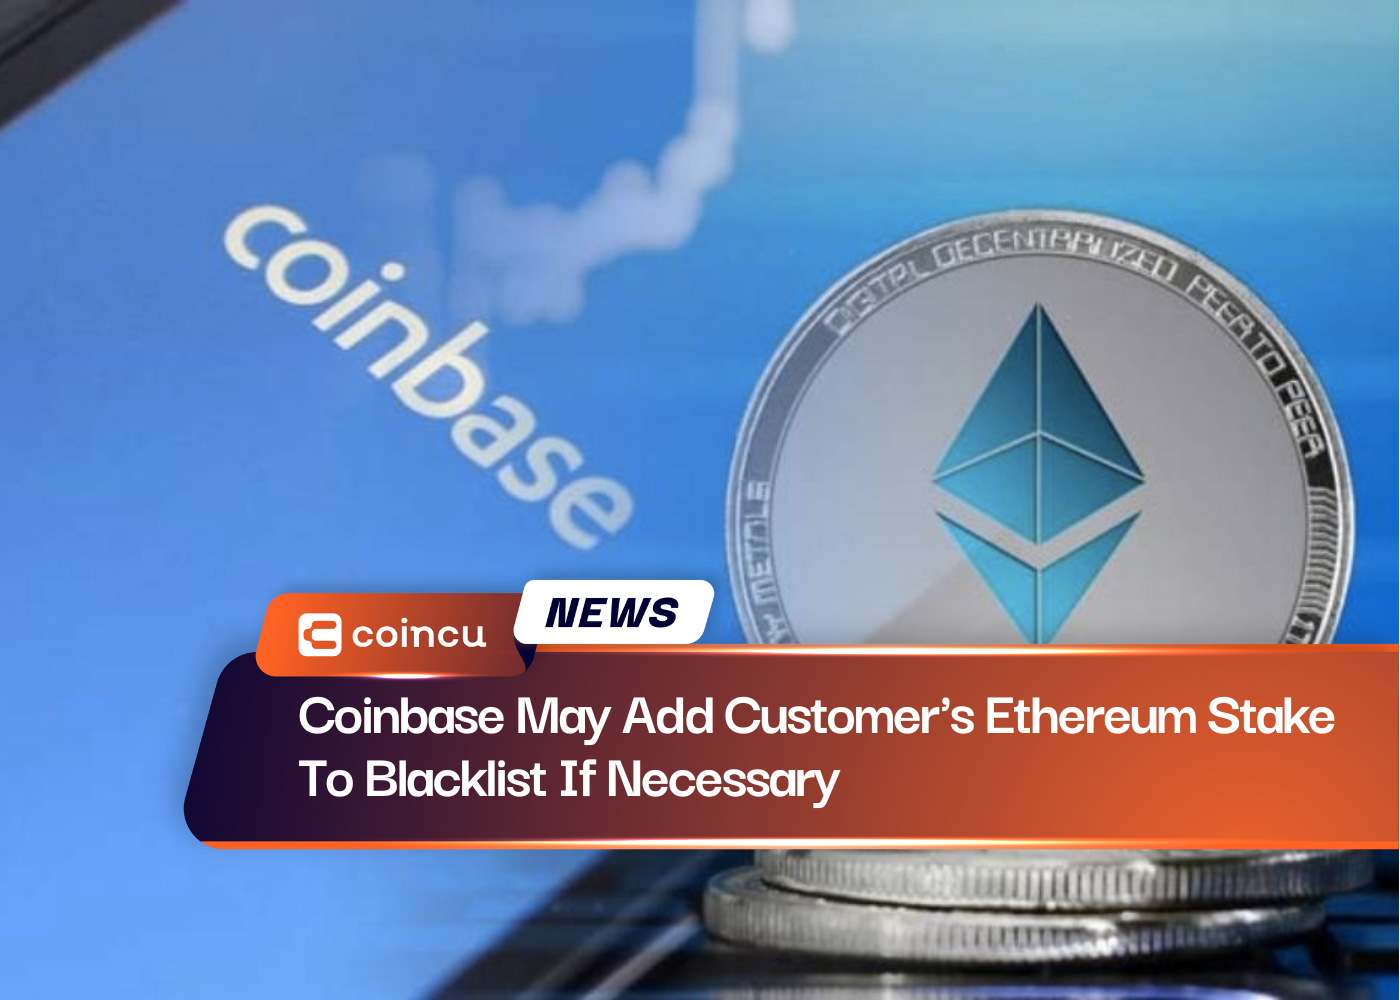 Coinbase May Add Customer's Ethereum Stake To Blacklist If Necessary